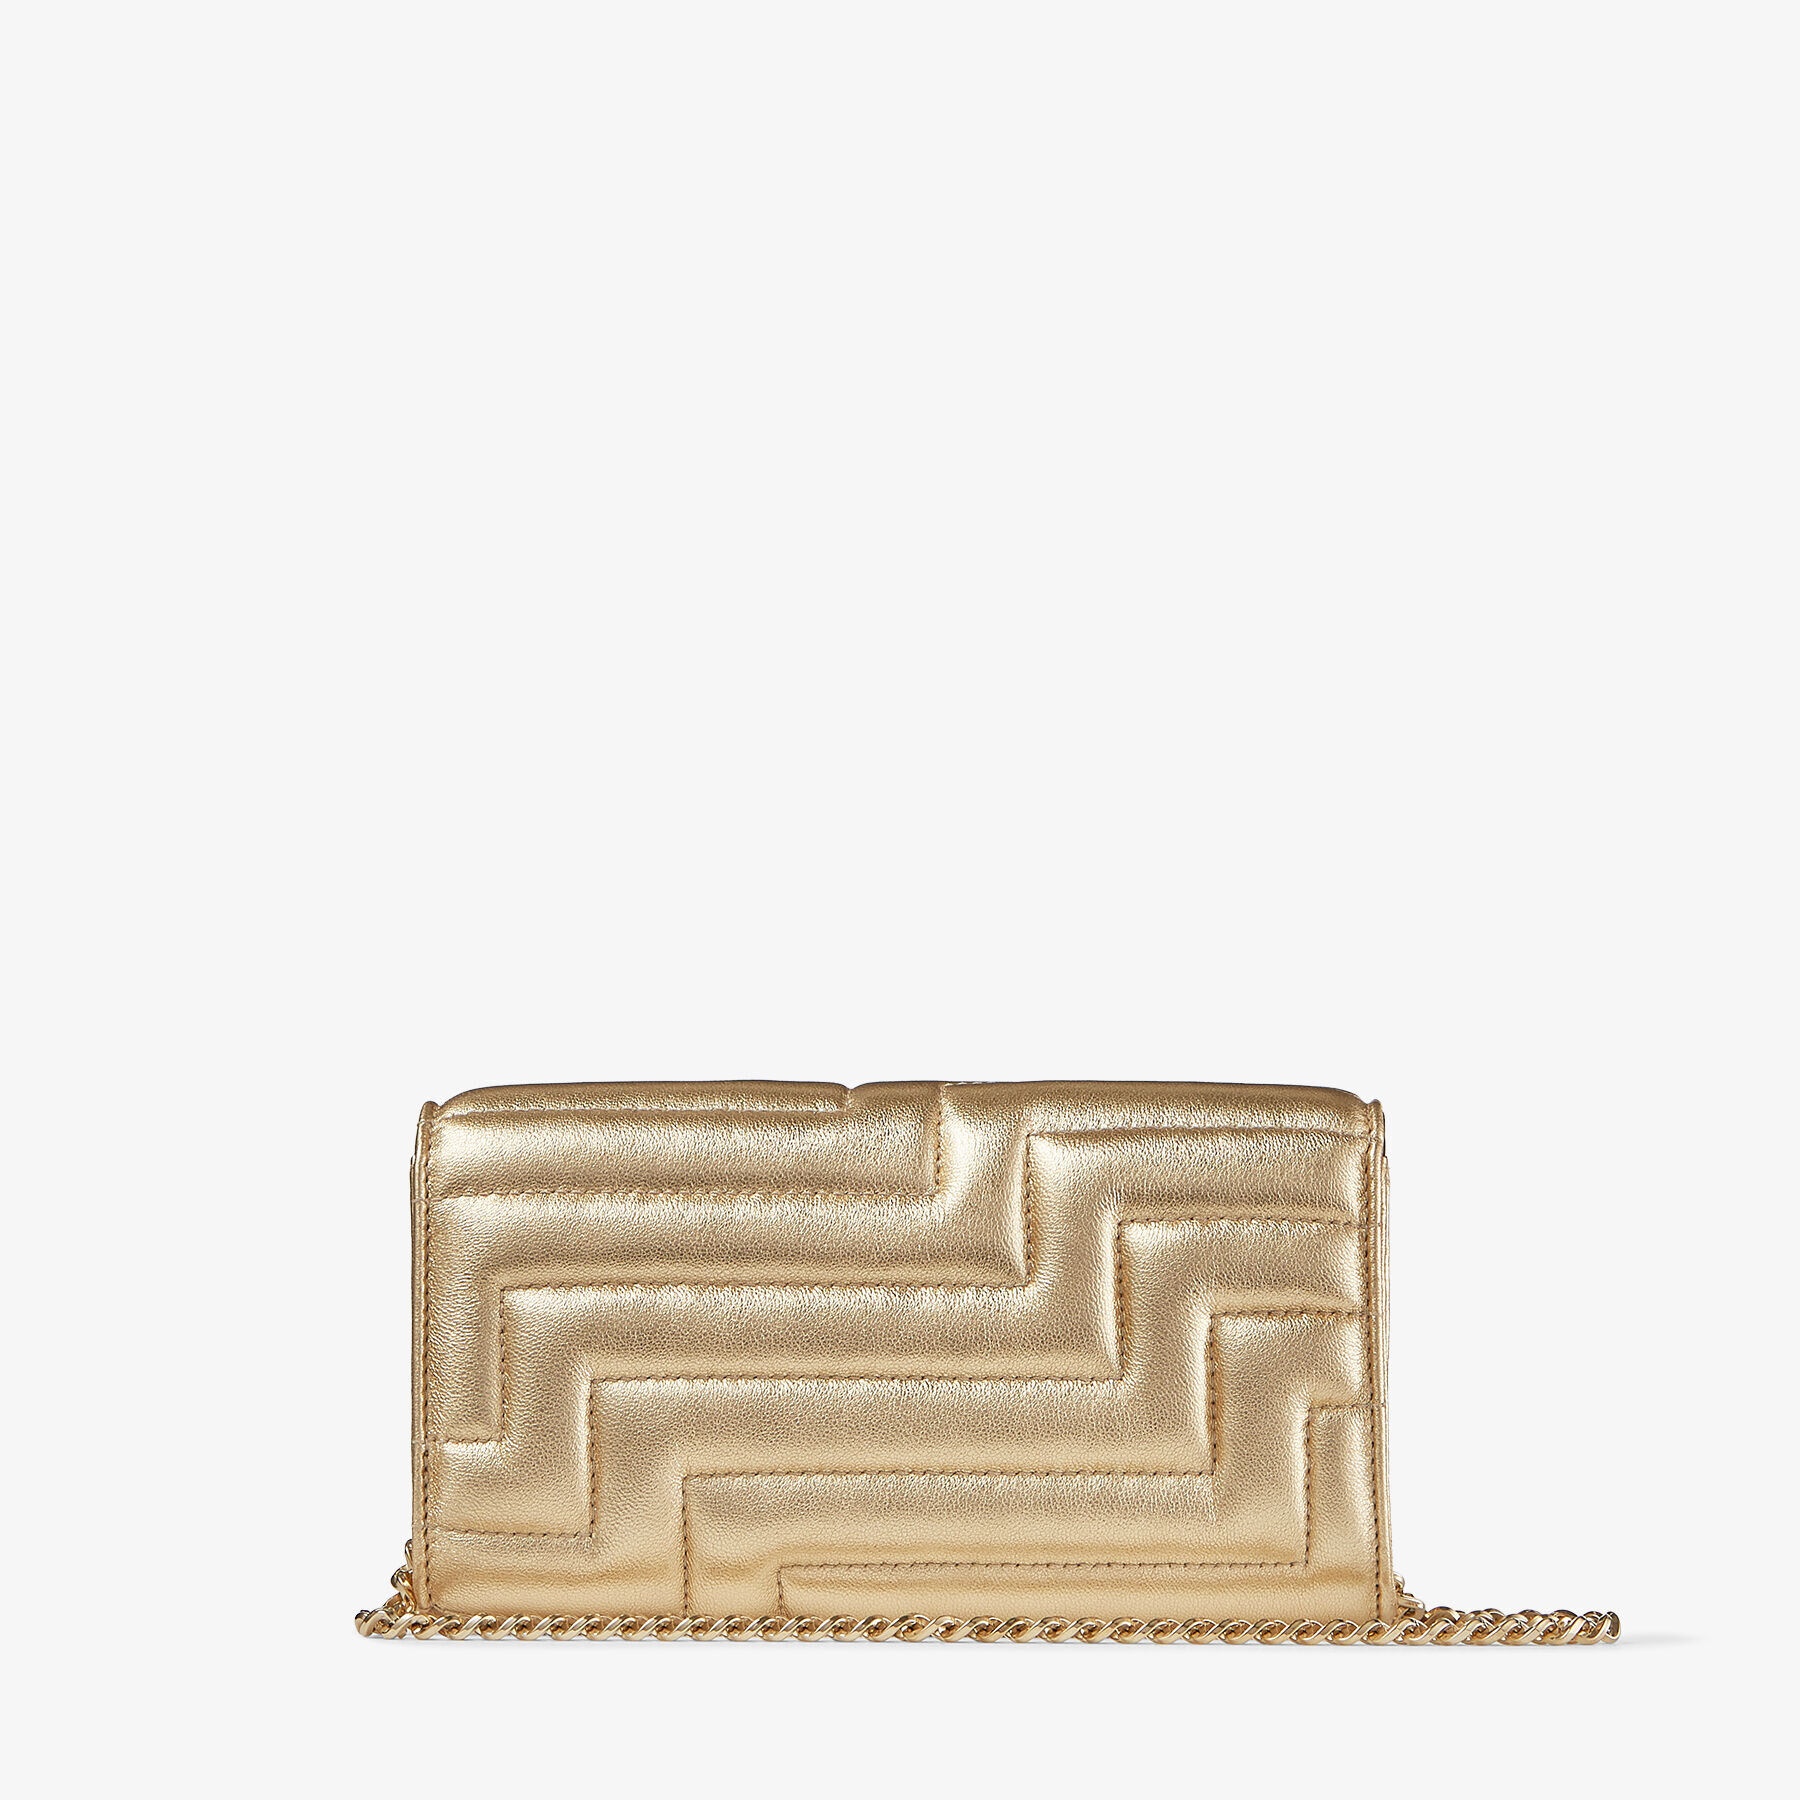 Varenne Avenue Wallet W/Chain
Gold Quilted Metallic Nappa Wallet with Crystal Bar - 7